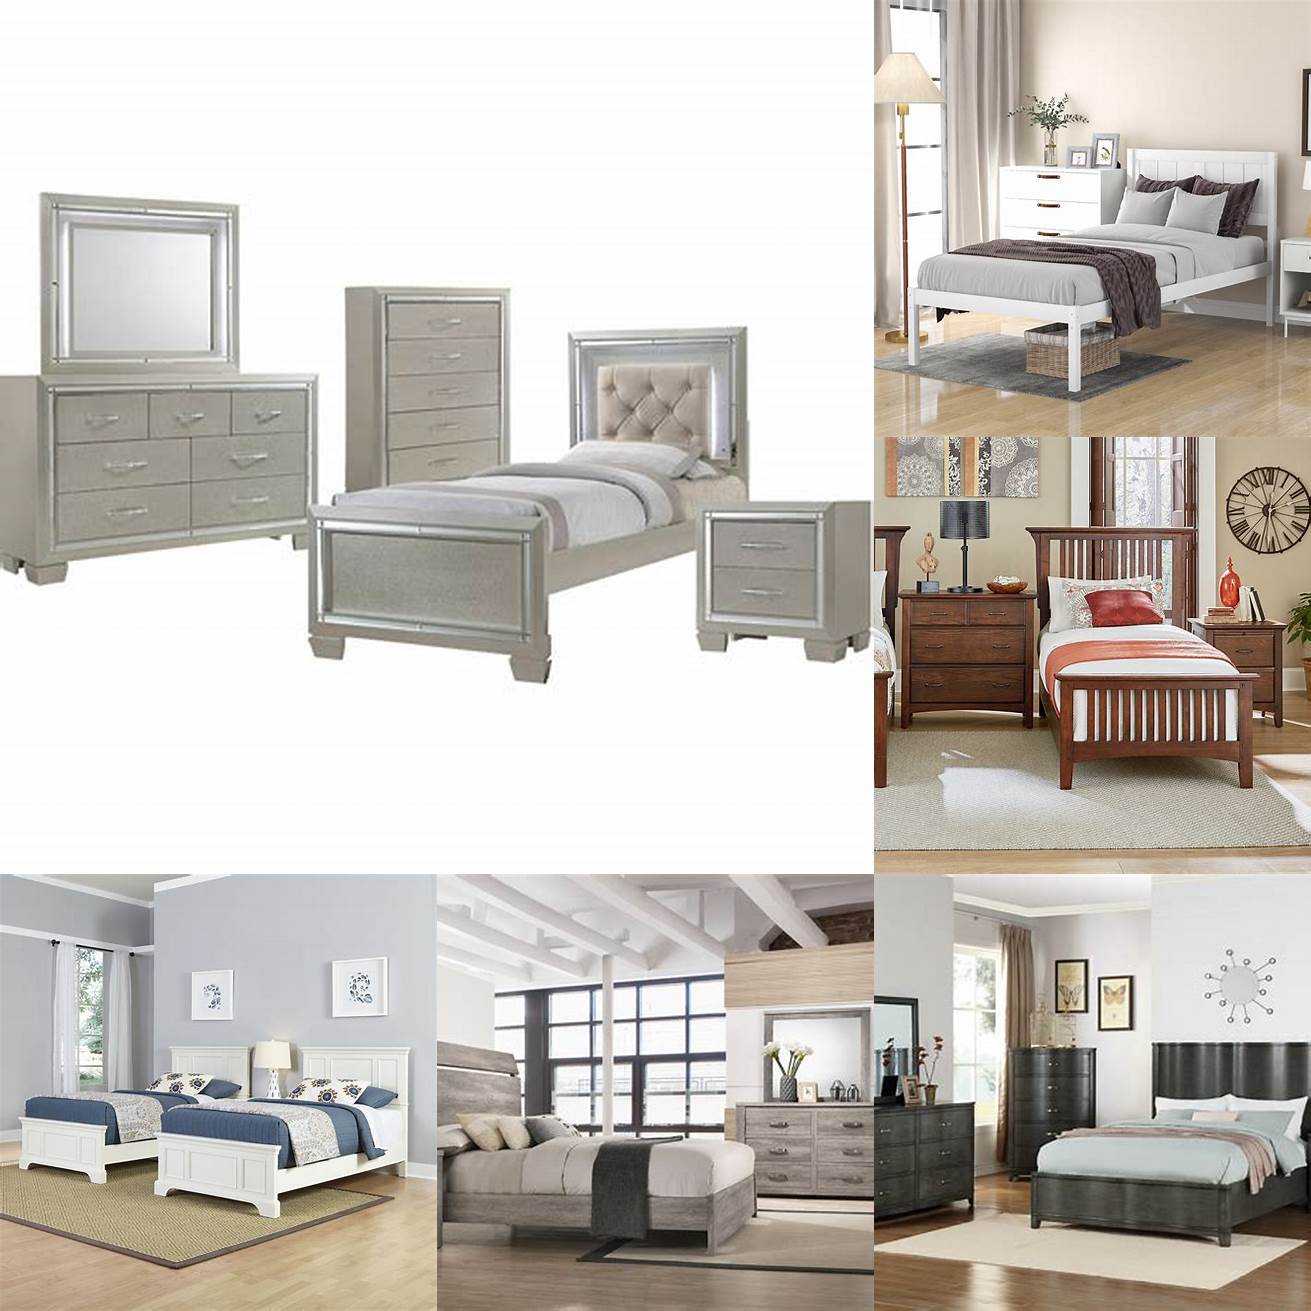 This modern set includes a twin bed frame nightstand and dresser perfect for a boy who loves clean lines and minimalist design